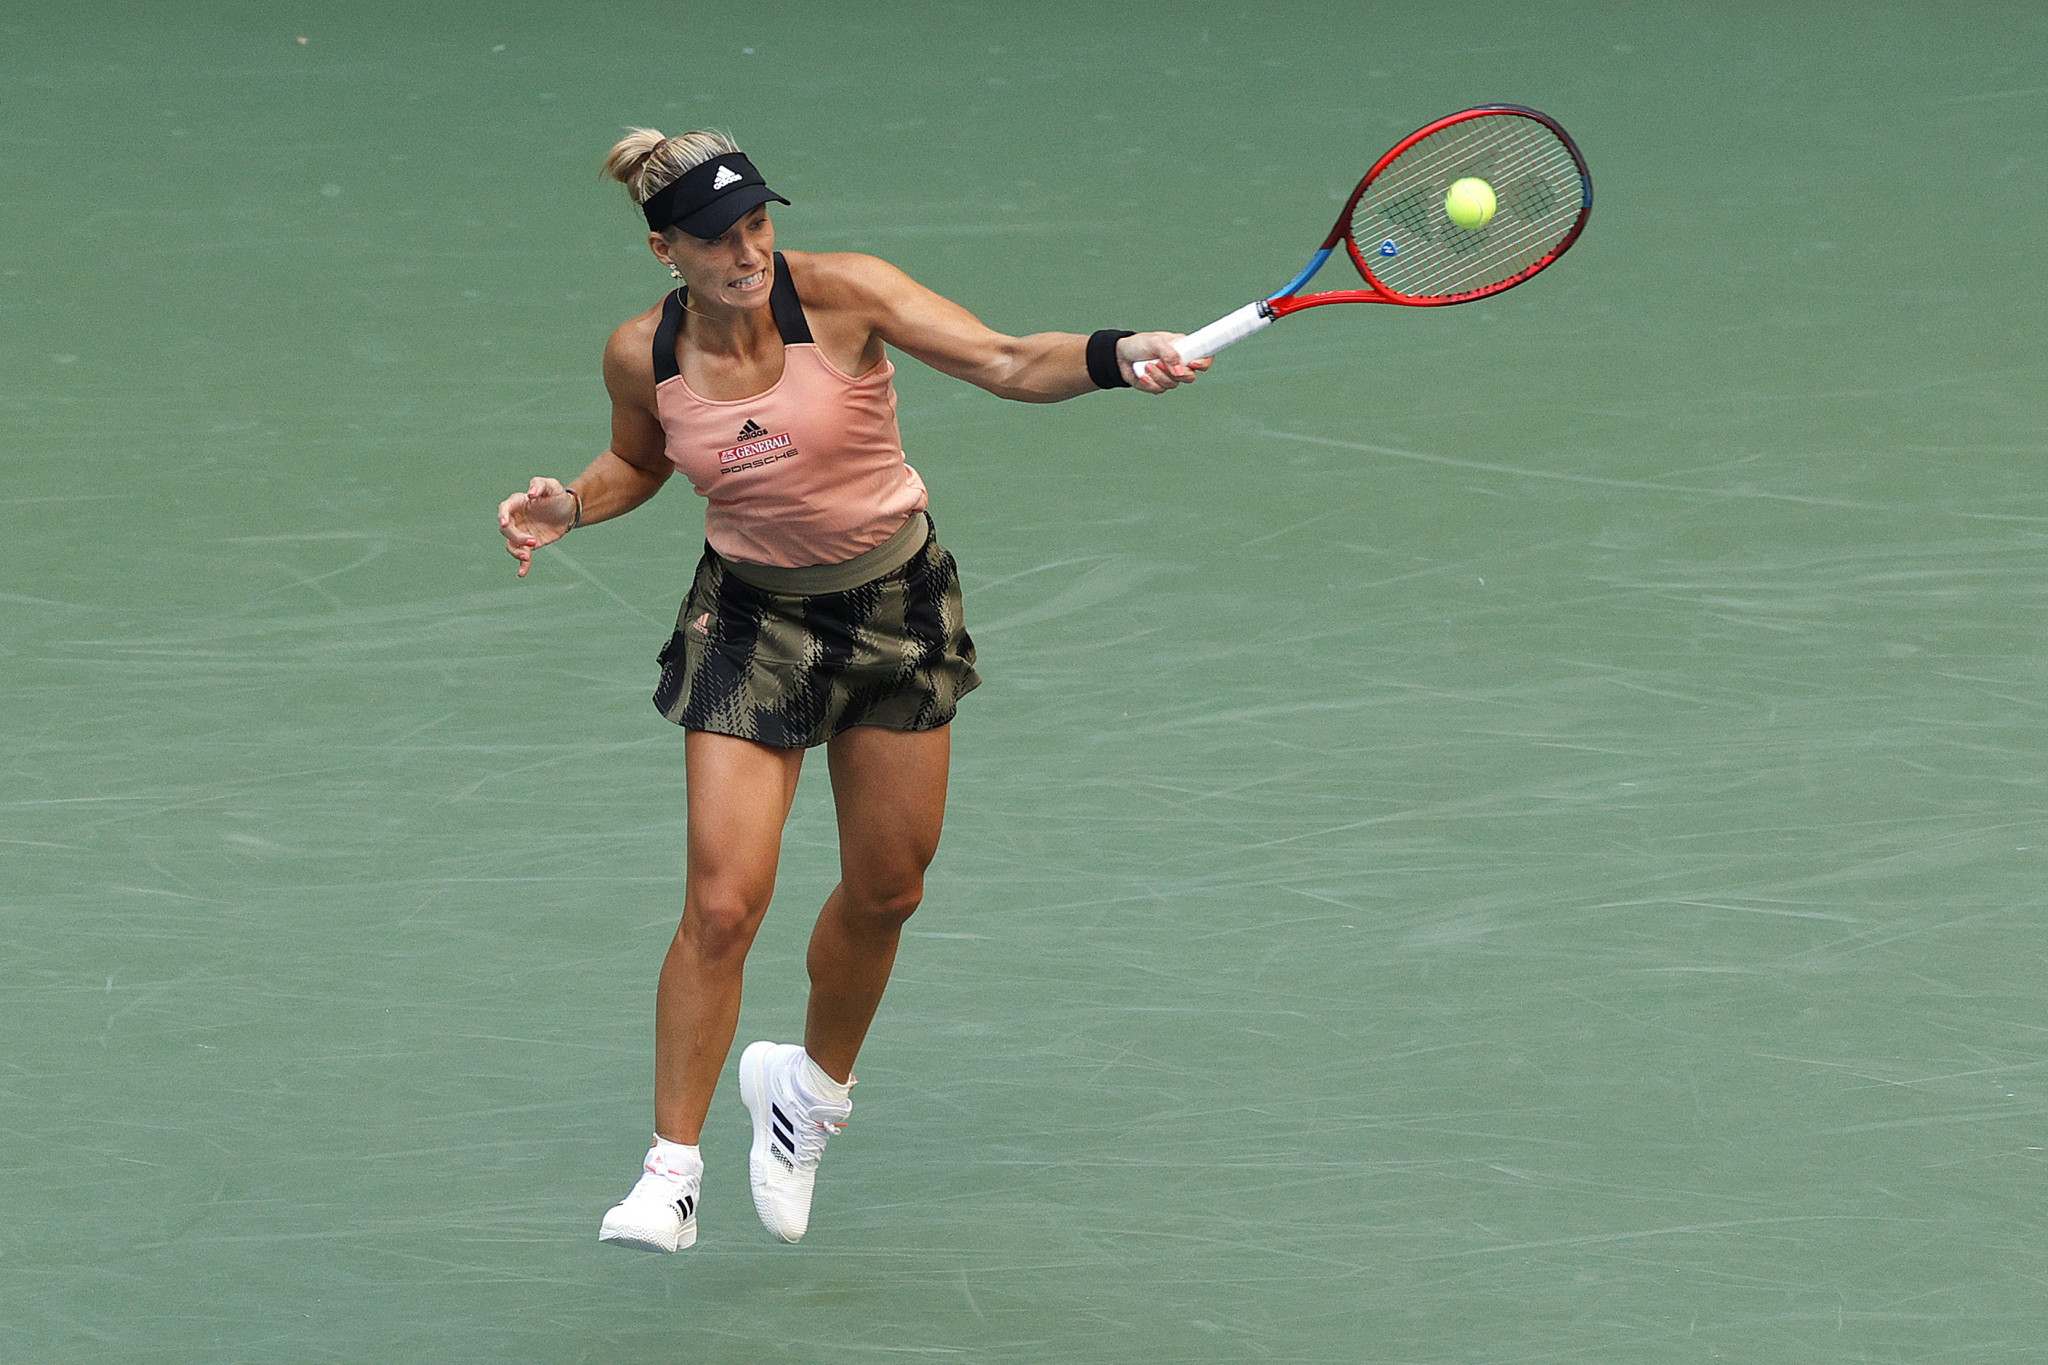 Likewise Germany's Angelique Kerber, the US Open champion in 2016